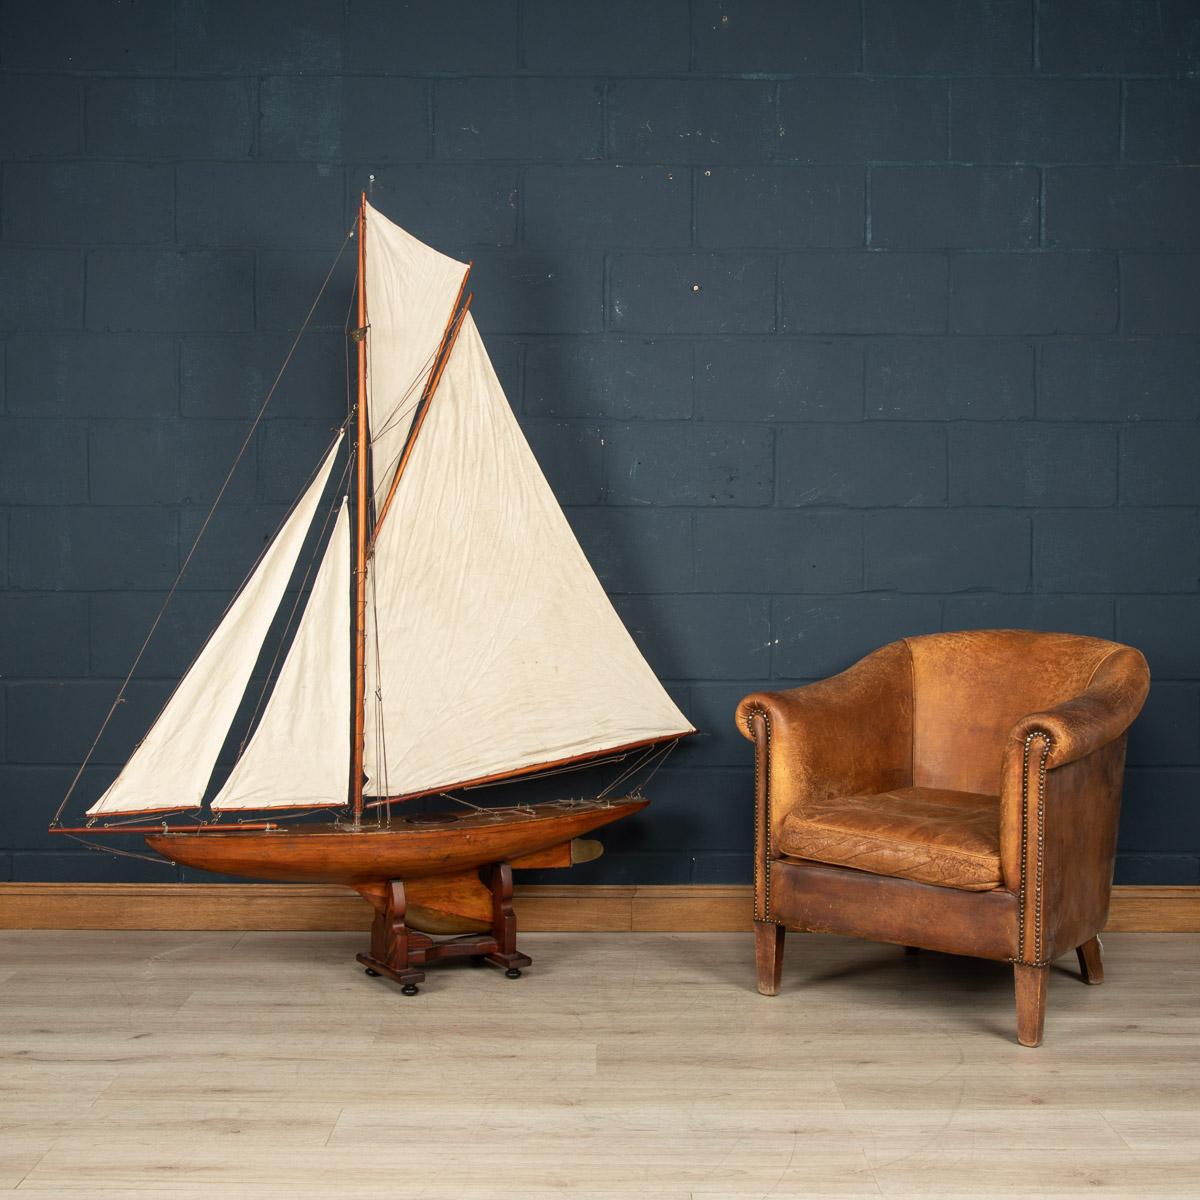 A fantastic antique Gaff Cutter pond yacht, with a lovely carved planked wood hull dating to the first half of the 20th century. The yacht is a great example of a British pond racing yacht and would have raced against similar yachts in competitions,